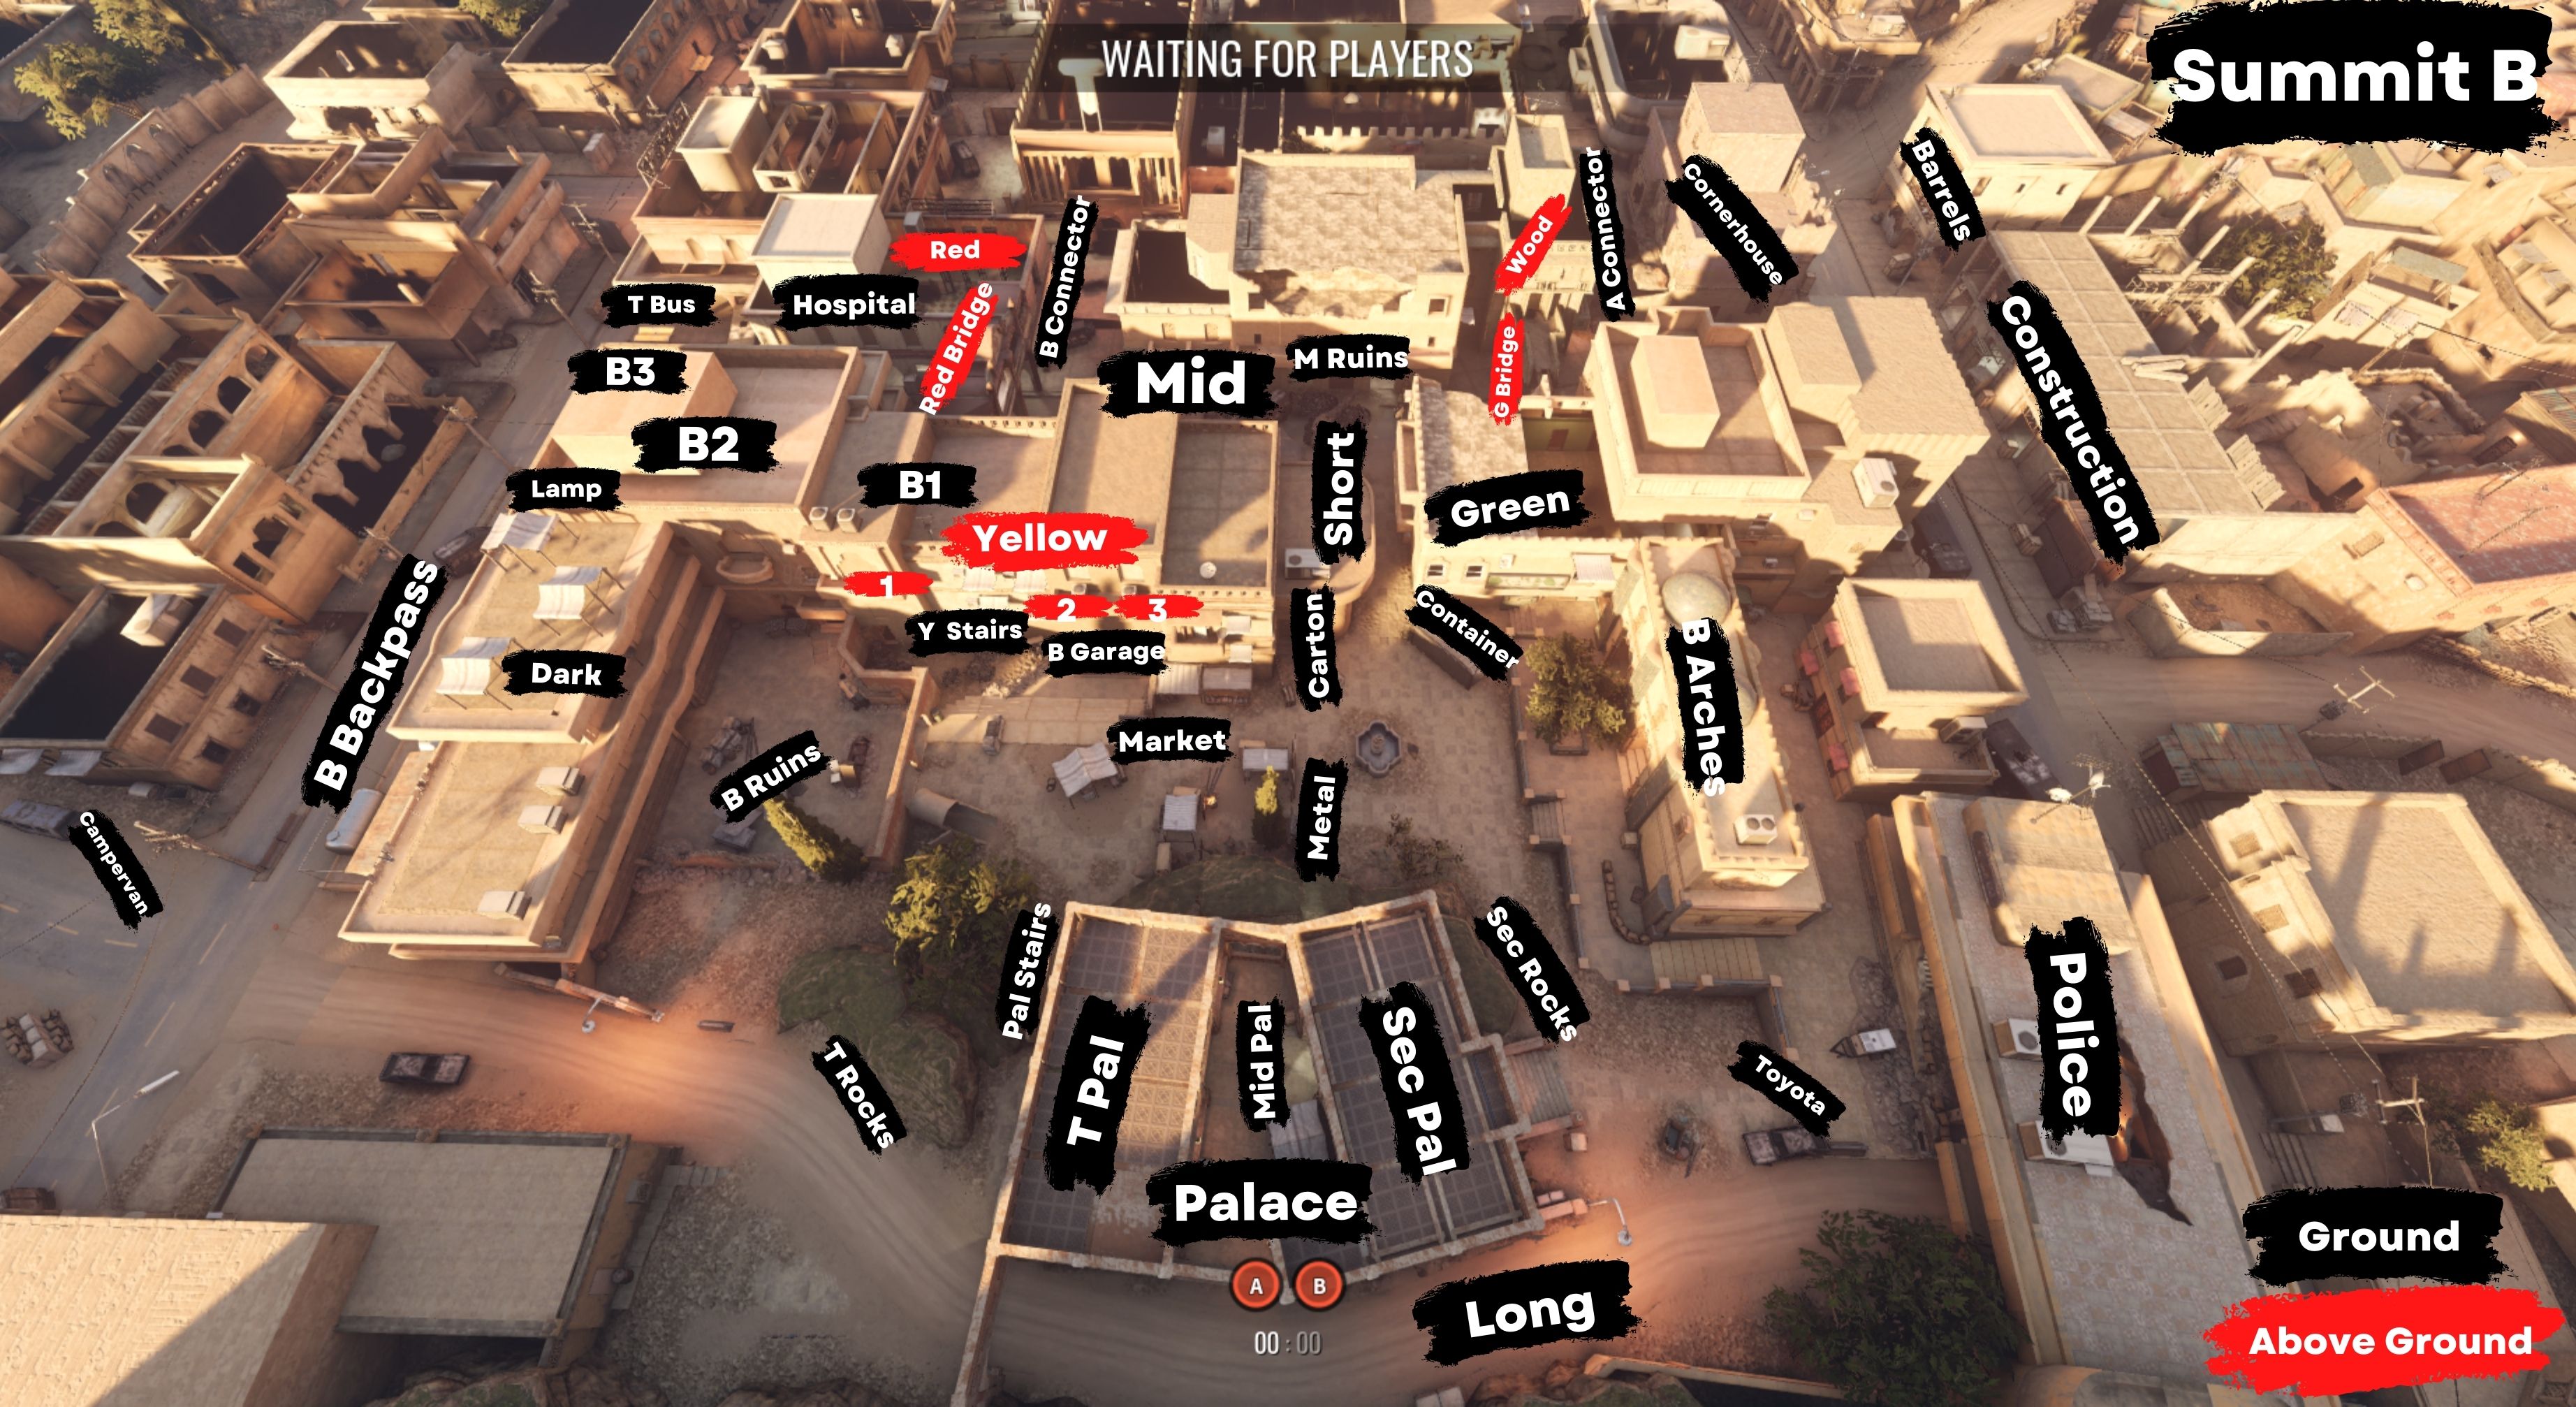 Insurgency: Sandstorm All Callouts in All Maps Guide - SUMMIT - FFFC200